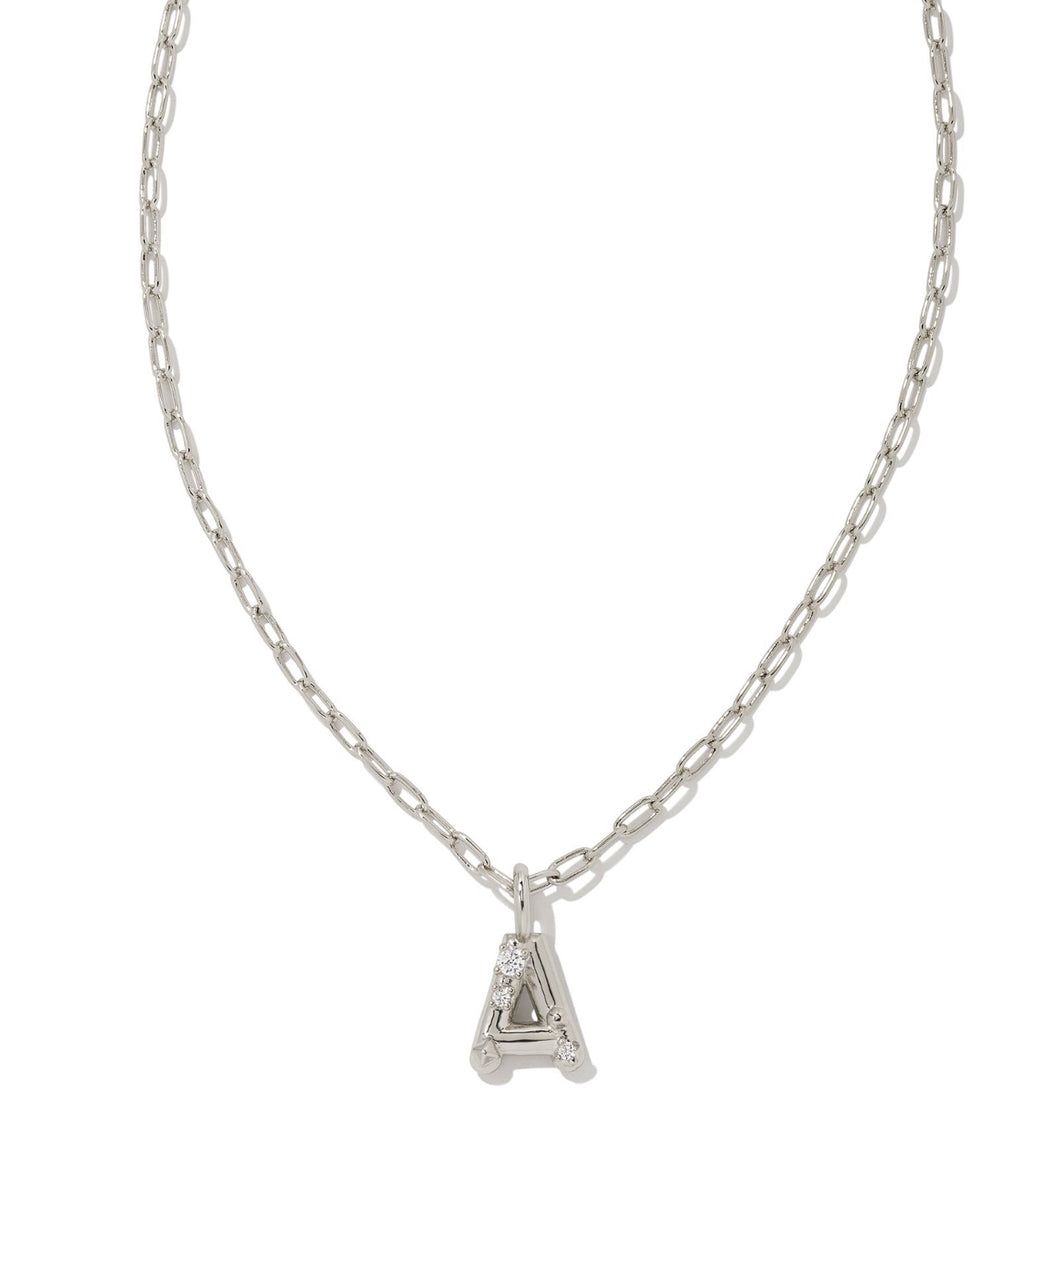 Kendra Scott: Crystal Letter Pendant Necklace in Silver